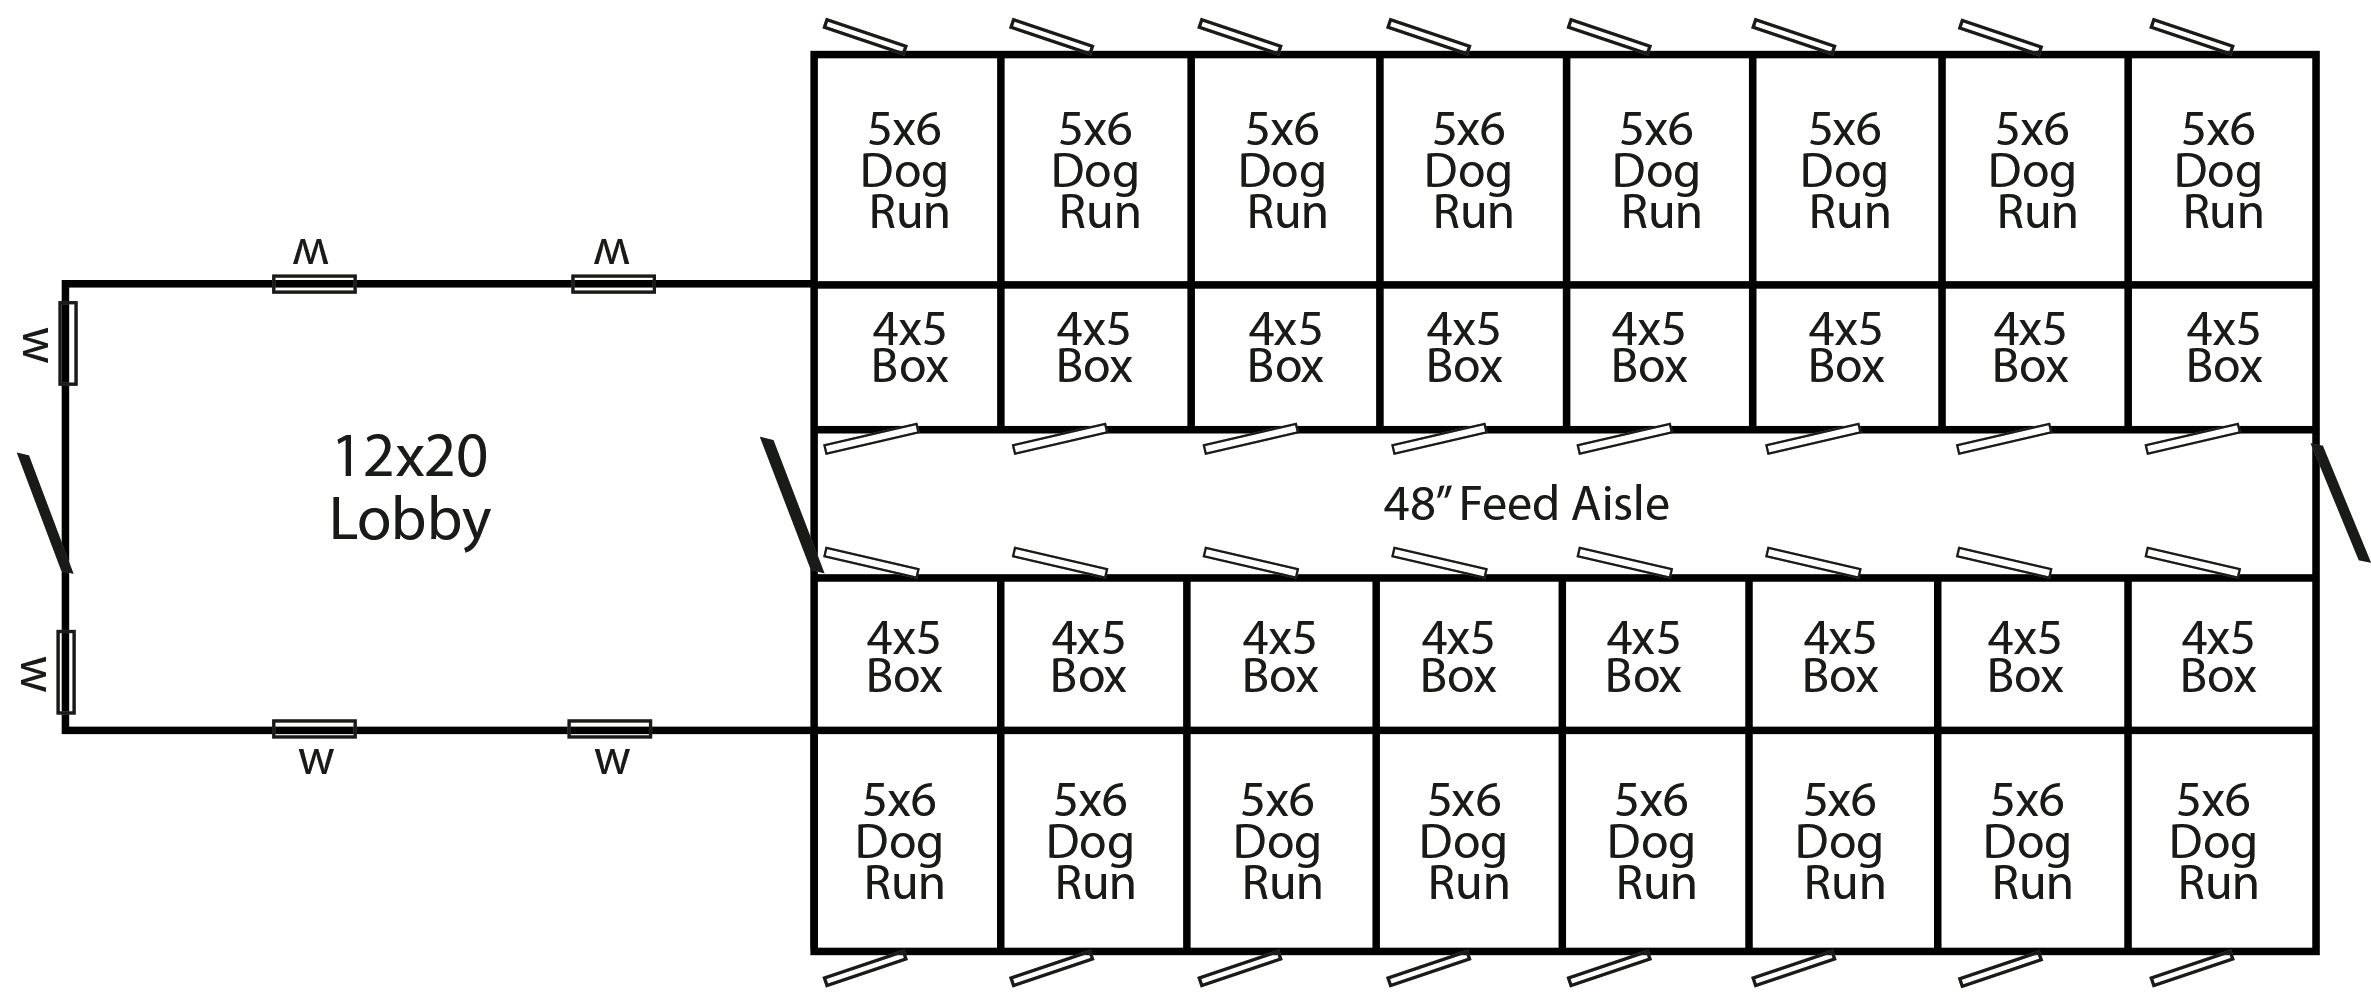 Floorplan of a 24x60 commercial kennel with 16 dog runs and a 12x20 lobby.